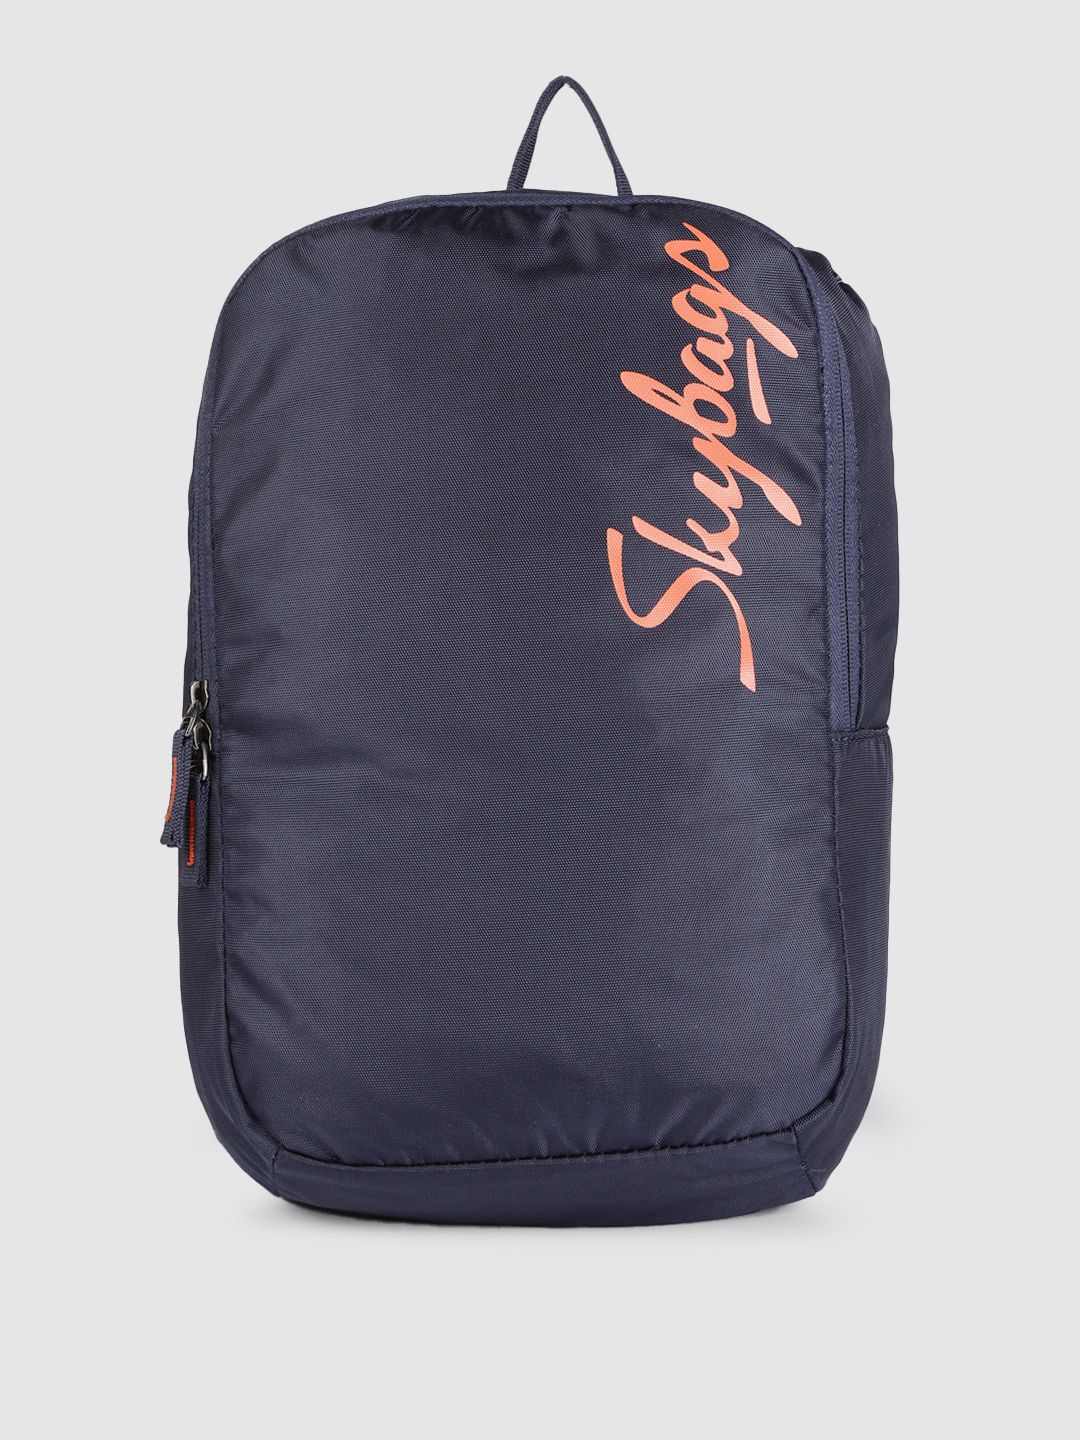 Skybags Unisex Navy Blue Brand Logo Backpack Price in India